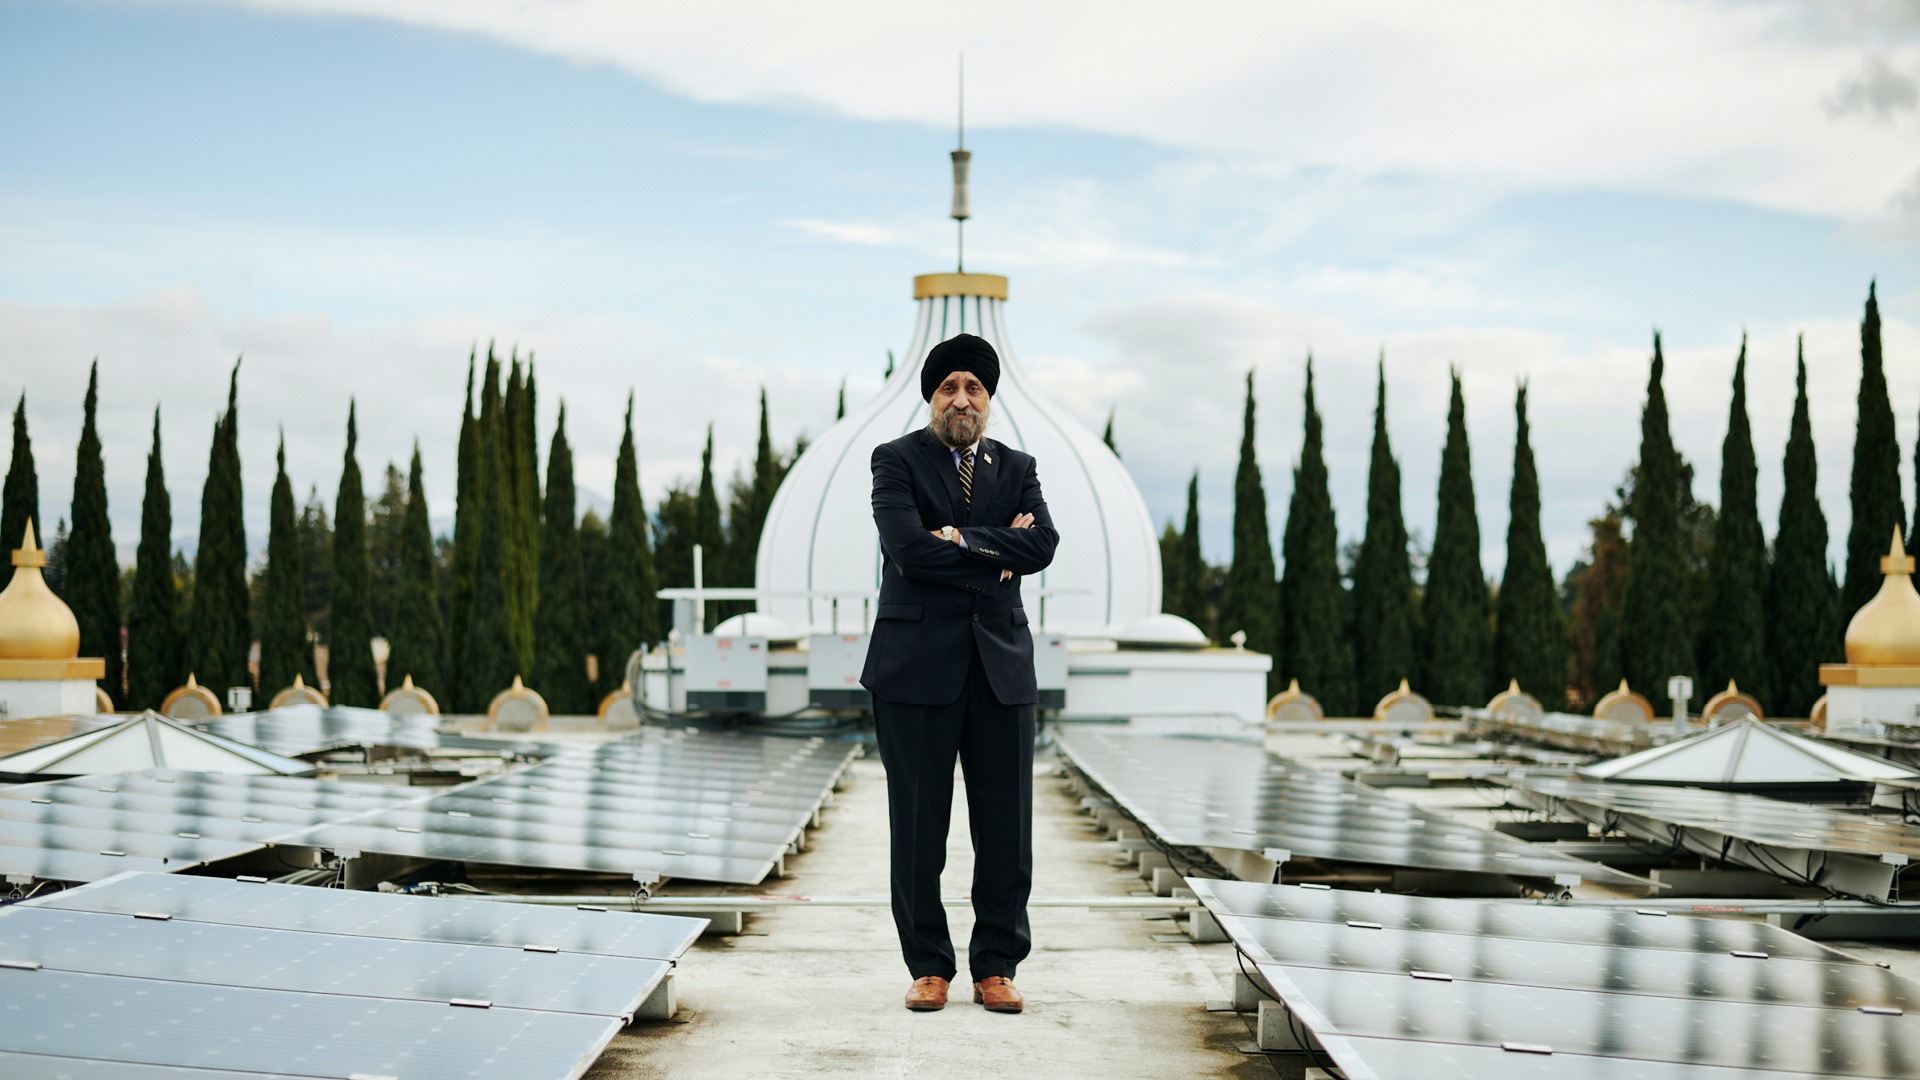 Surinder Amrit S. Bedi, MSISE, visits the rooftop solar system Sunpreme Inc. installed at Gurdwara Sahib in Fremont, California, when Bedi was an executive vice president at the company